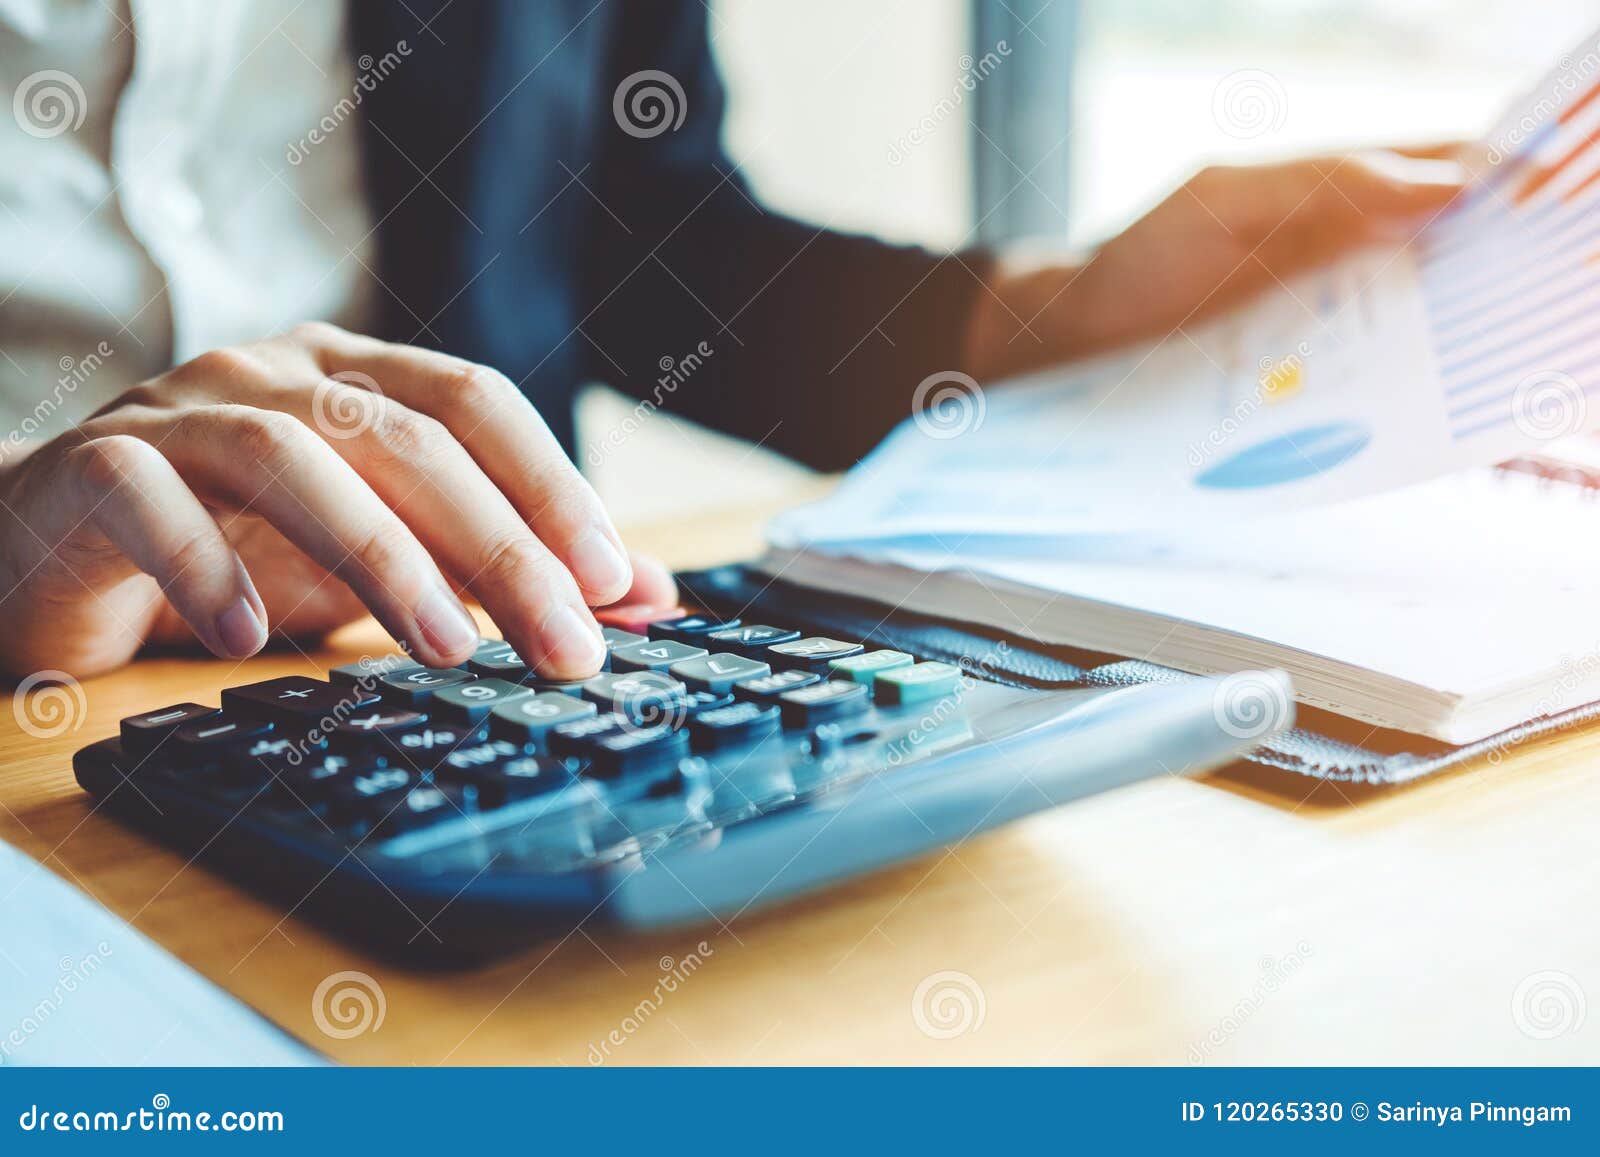 business man accounting calculating cost economic financial data